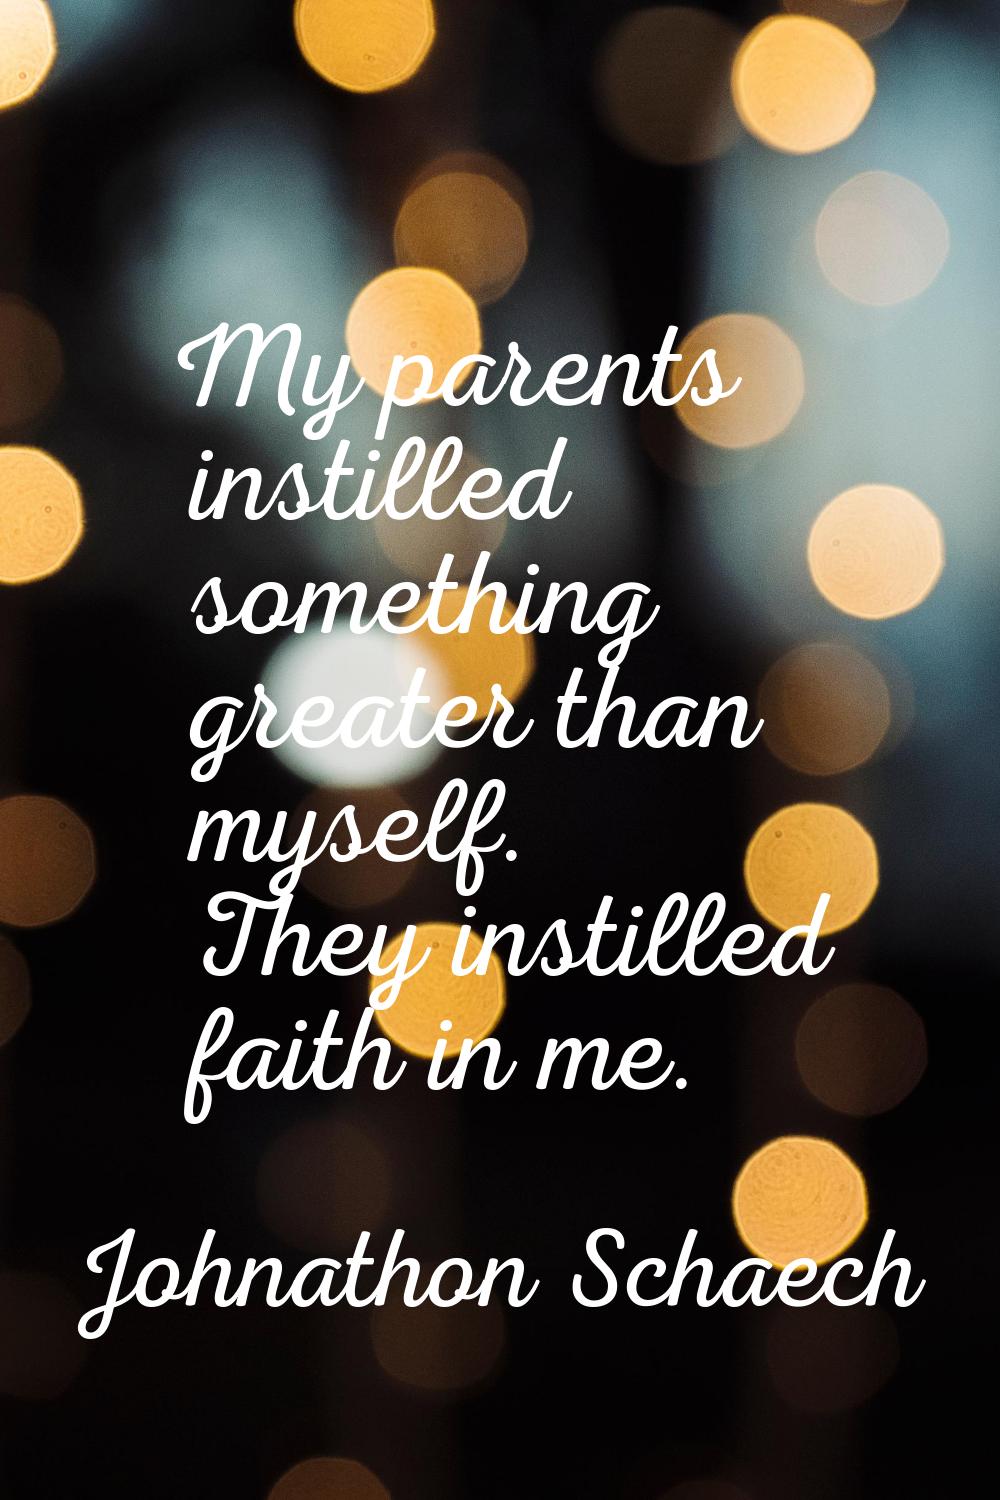 My parents instilled something greater than myself. They instilled faith in me.